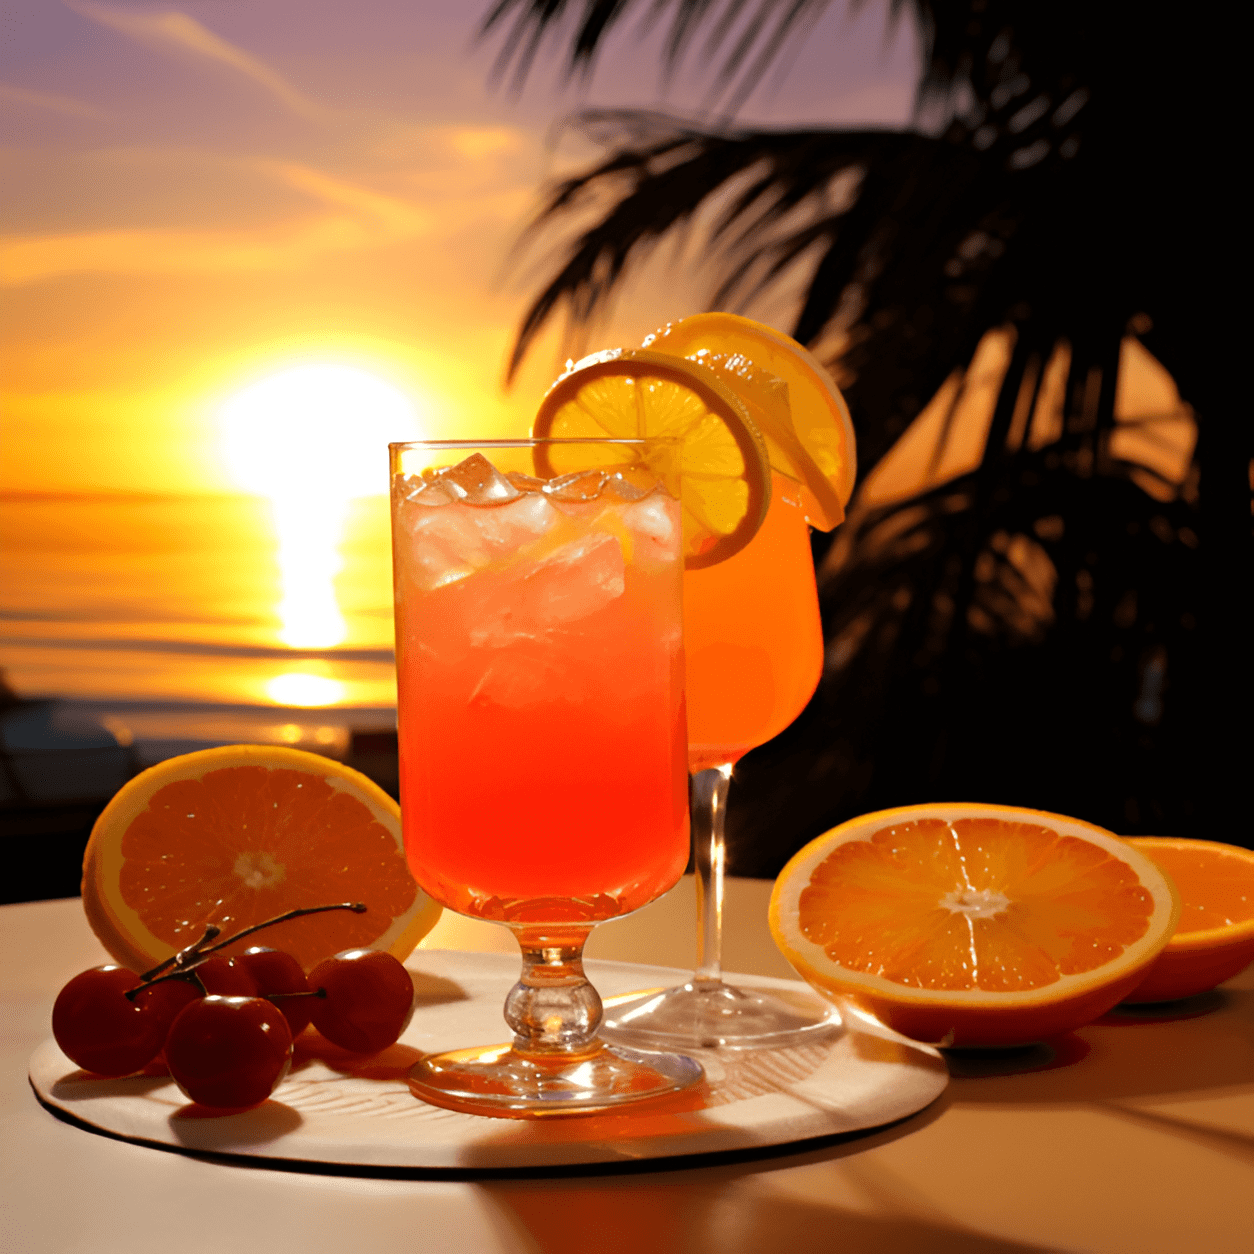 Sunset Cocktail Recipe - The Sunset cocktail has a delightful blend of sweet, sour, and fruity flavors. It is a refreshing and light drink with a hint of tanginess from the citrus fruits. The combination of orange, pineapple, and grenadine gives it a tropical and exotic taste that is perfect for warm summer evenings.